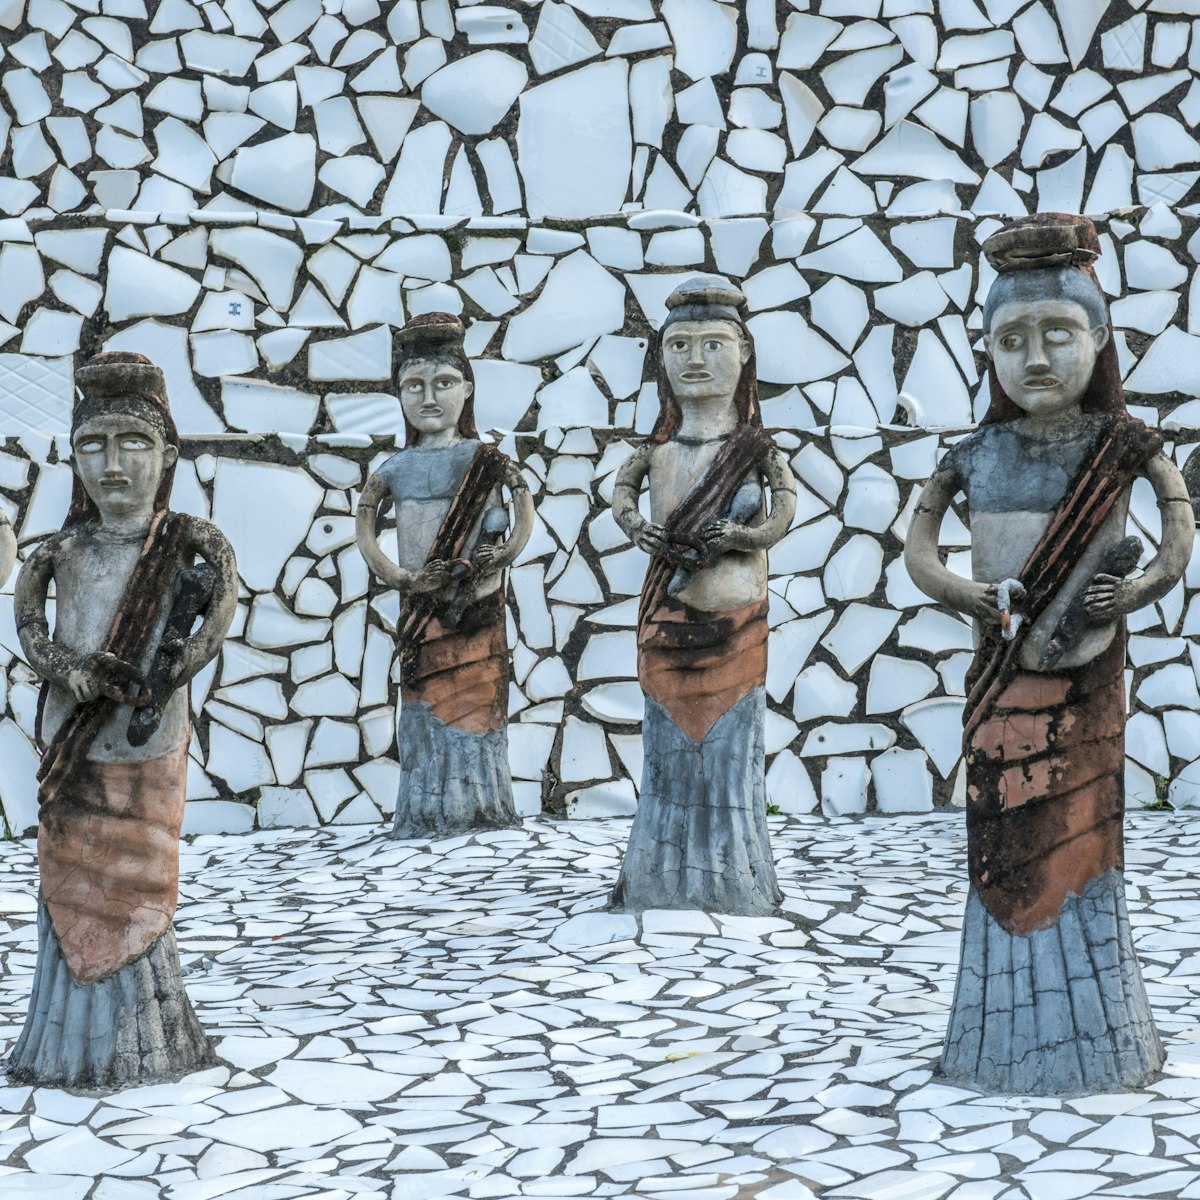 [UNVERIFIED CONTENT] One of the highlights of Chandigarh is the Rock Garden designed by local artist Nek Chand.